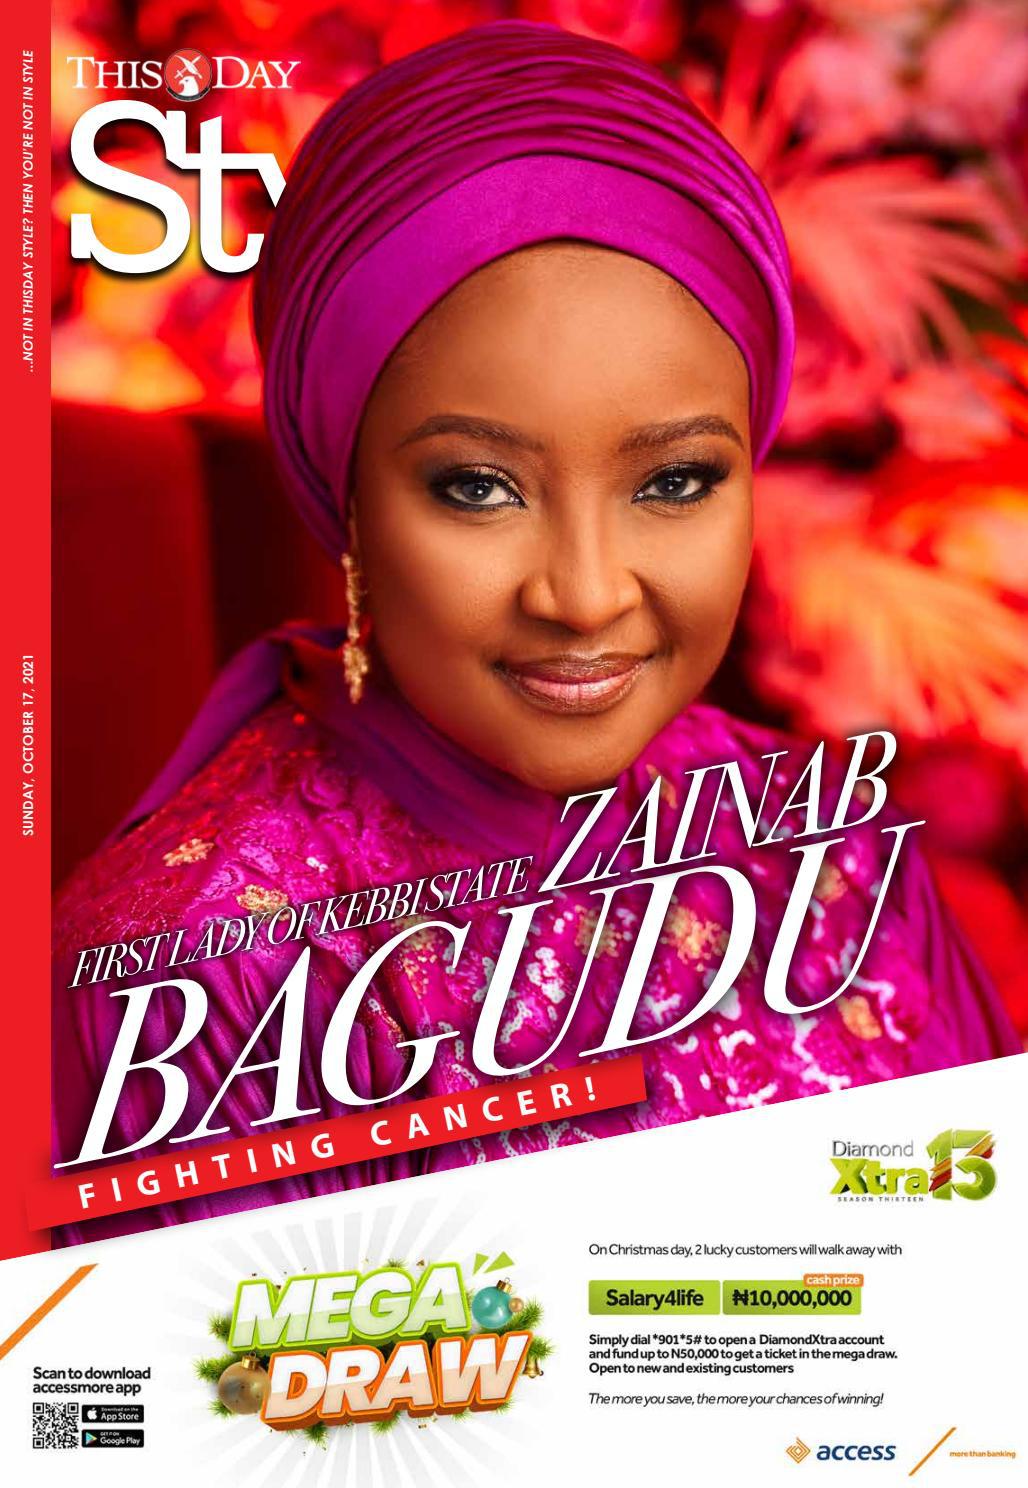 THISDAY STYLE MAGAZINE 17TH OCTOBER 2021